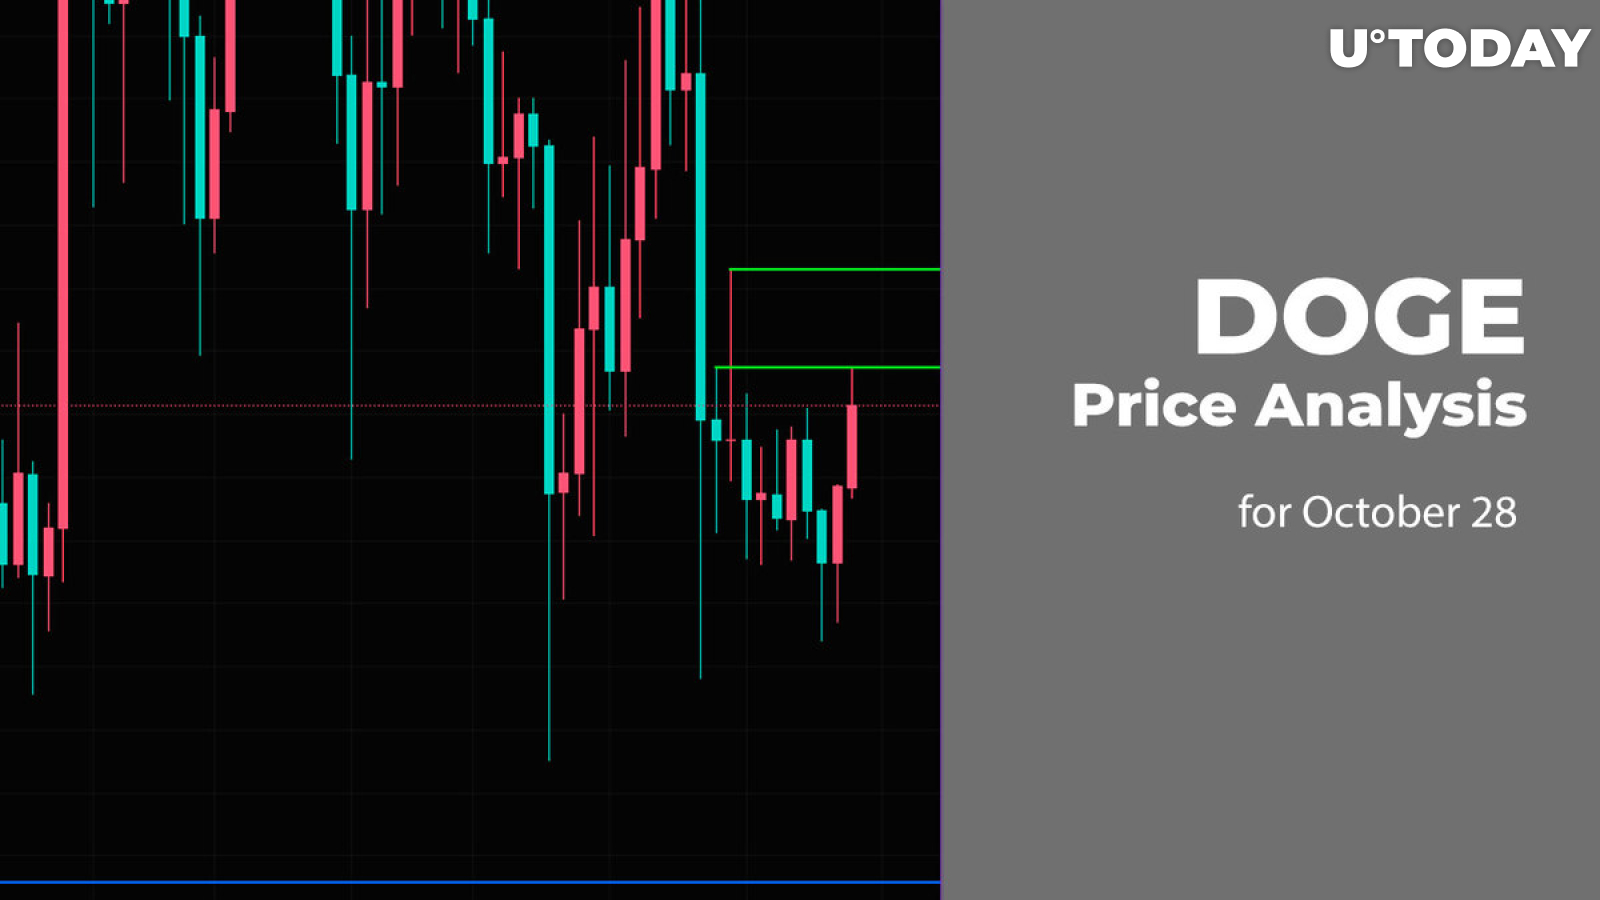 DOGE Price Analysis for October 28